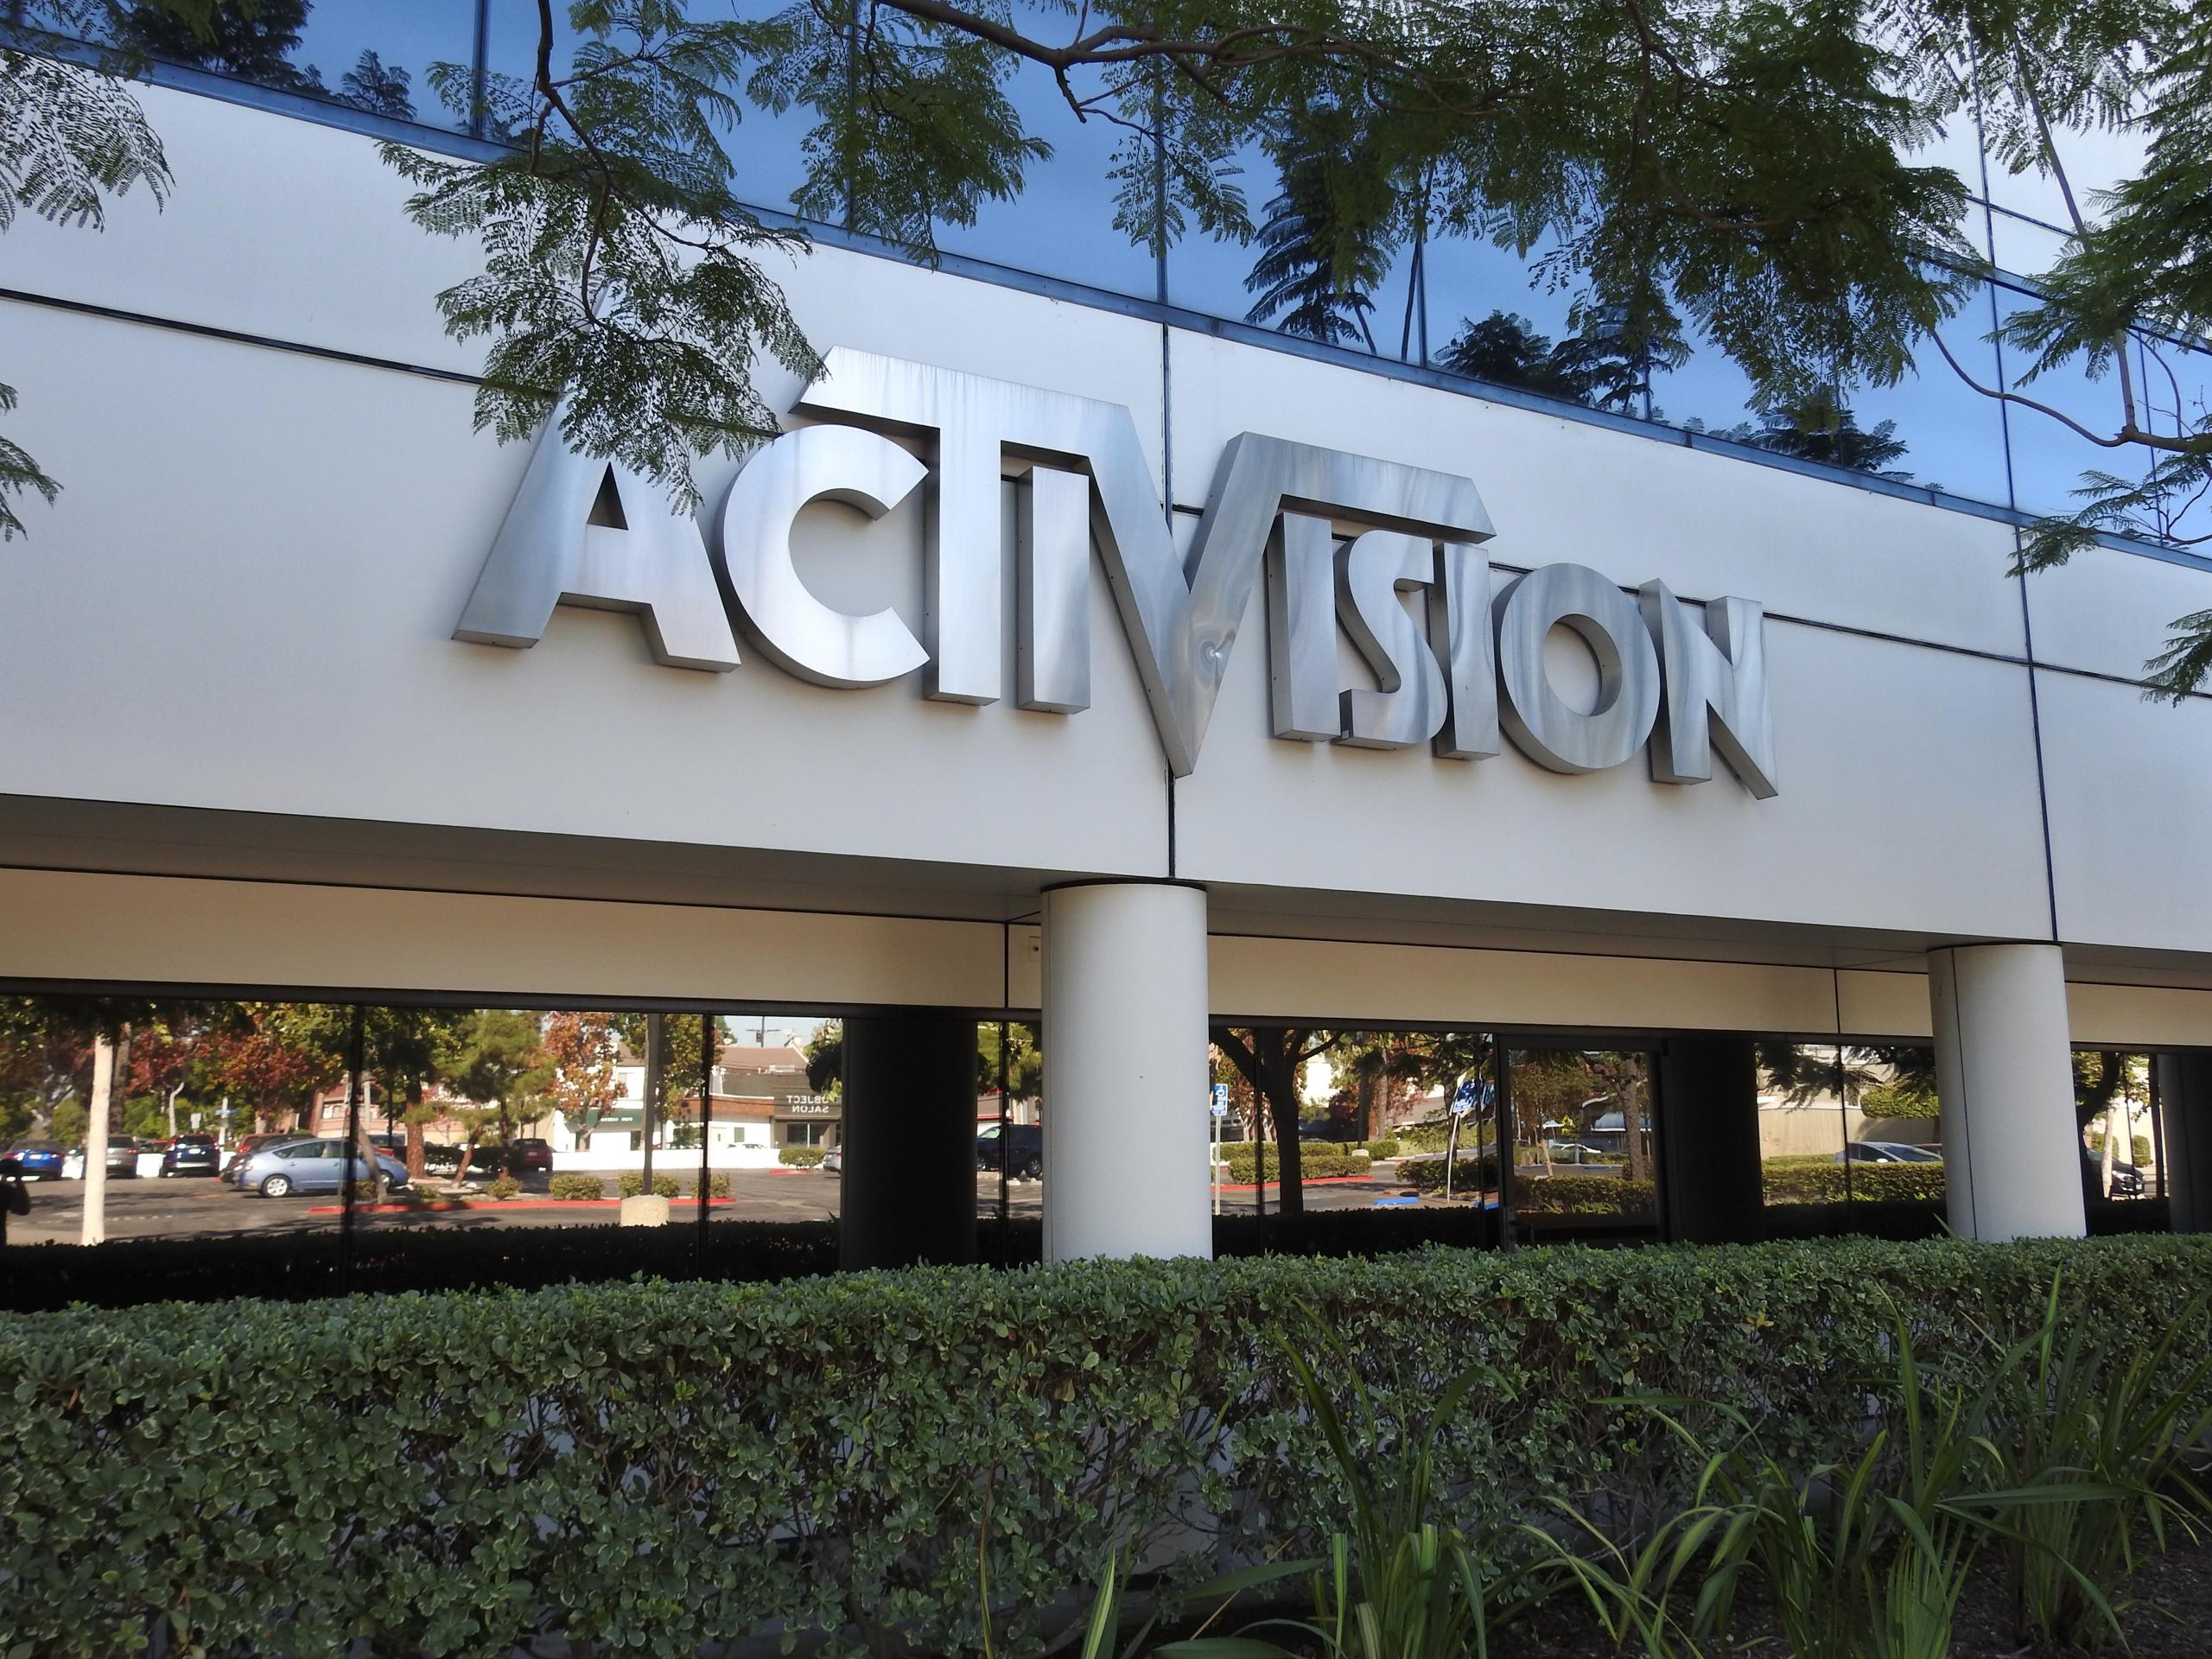 Microsoft wins FTC fight to buy Activision Blizzard - The Verge